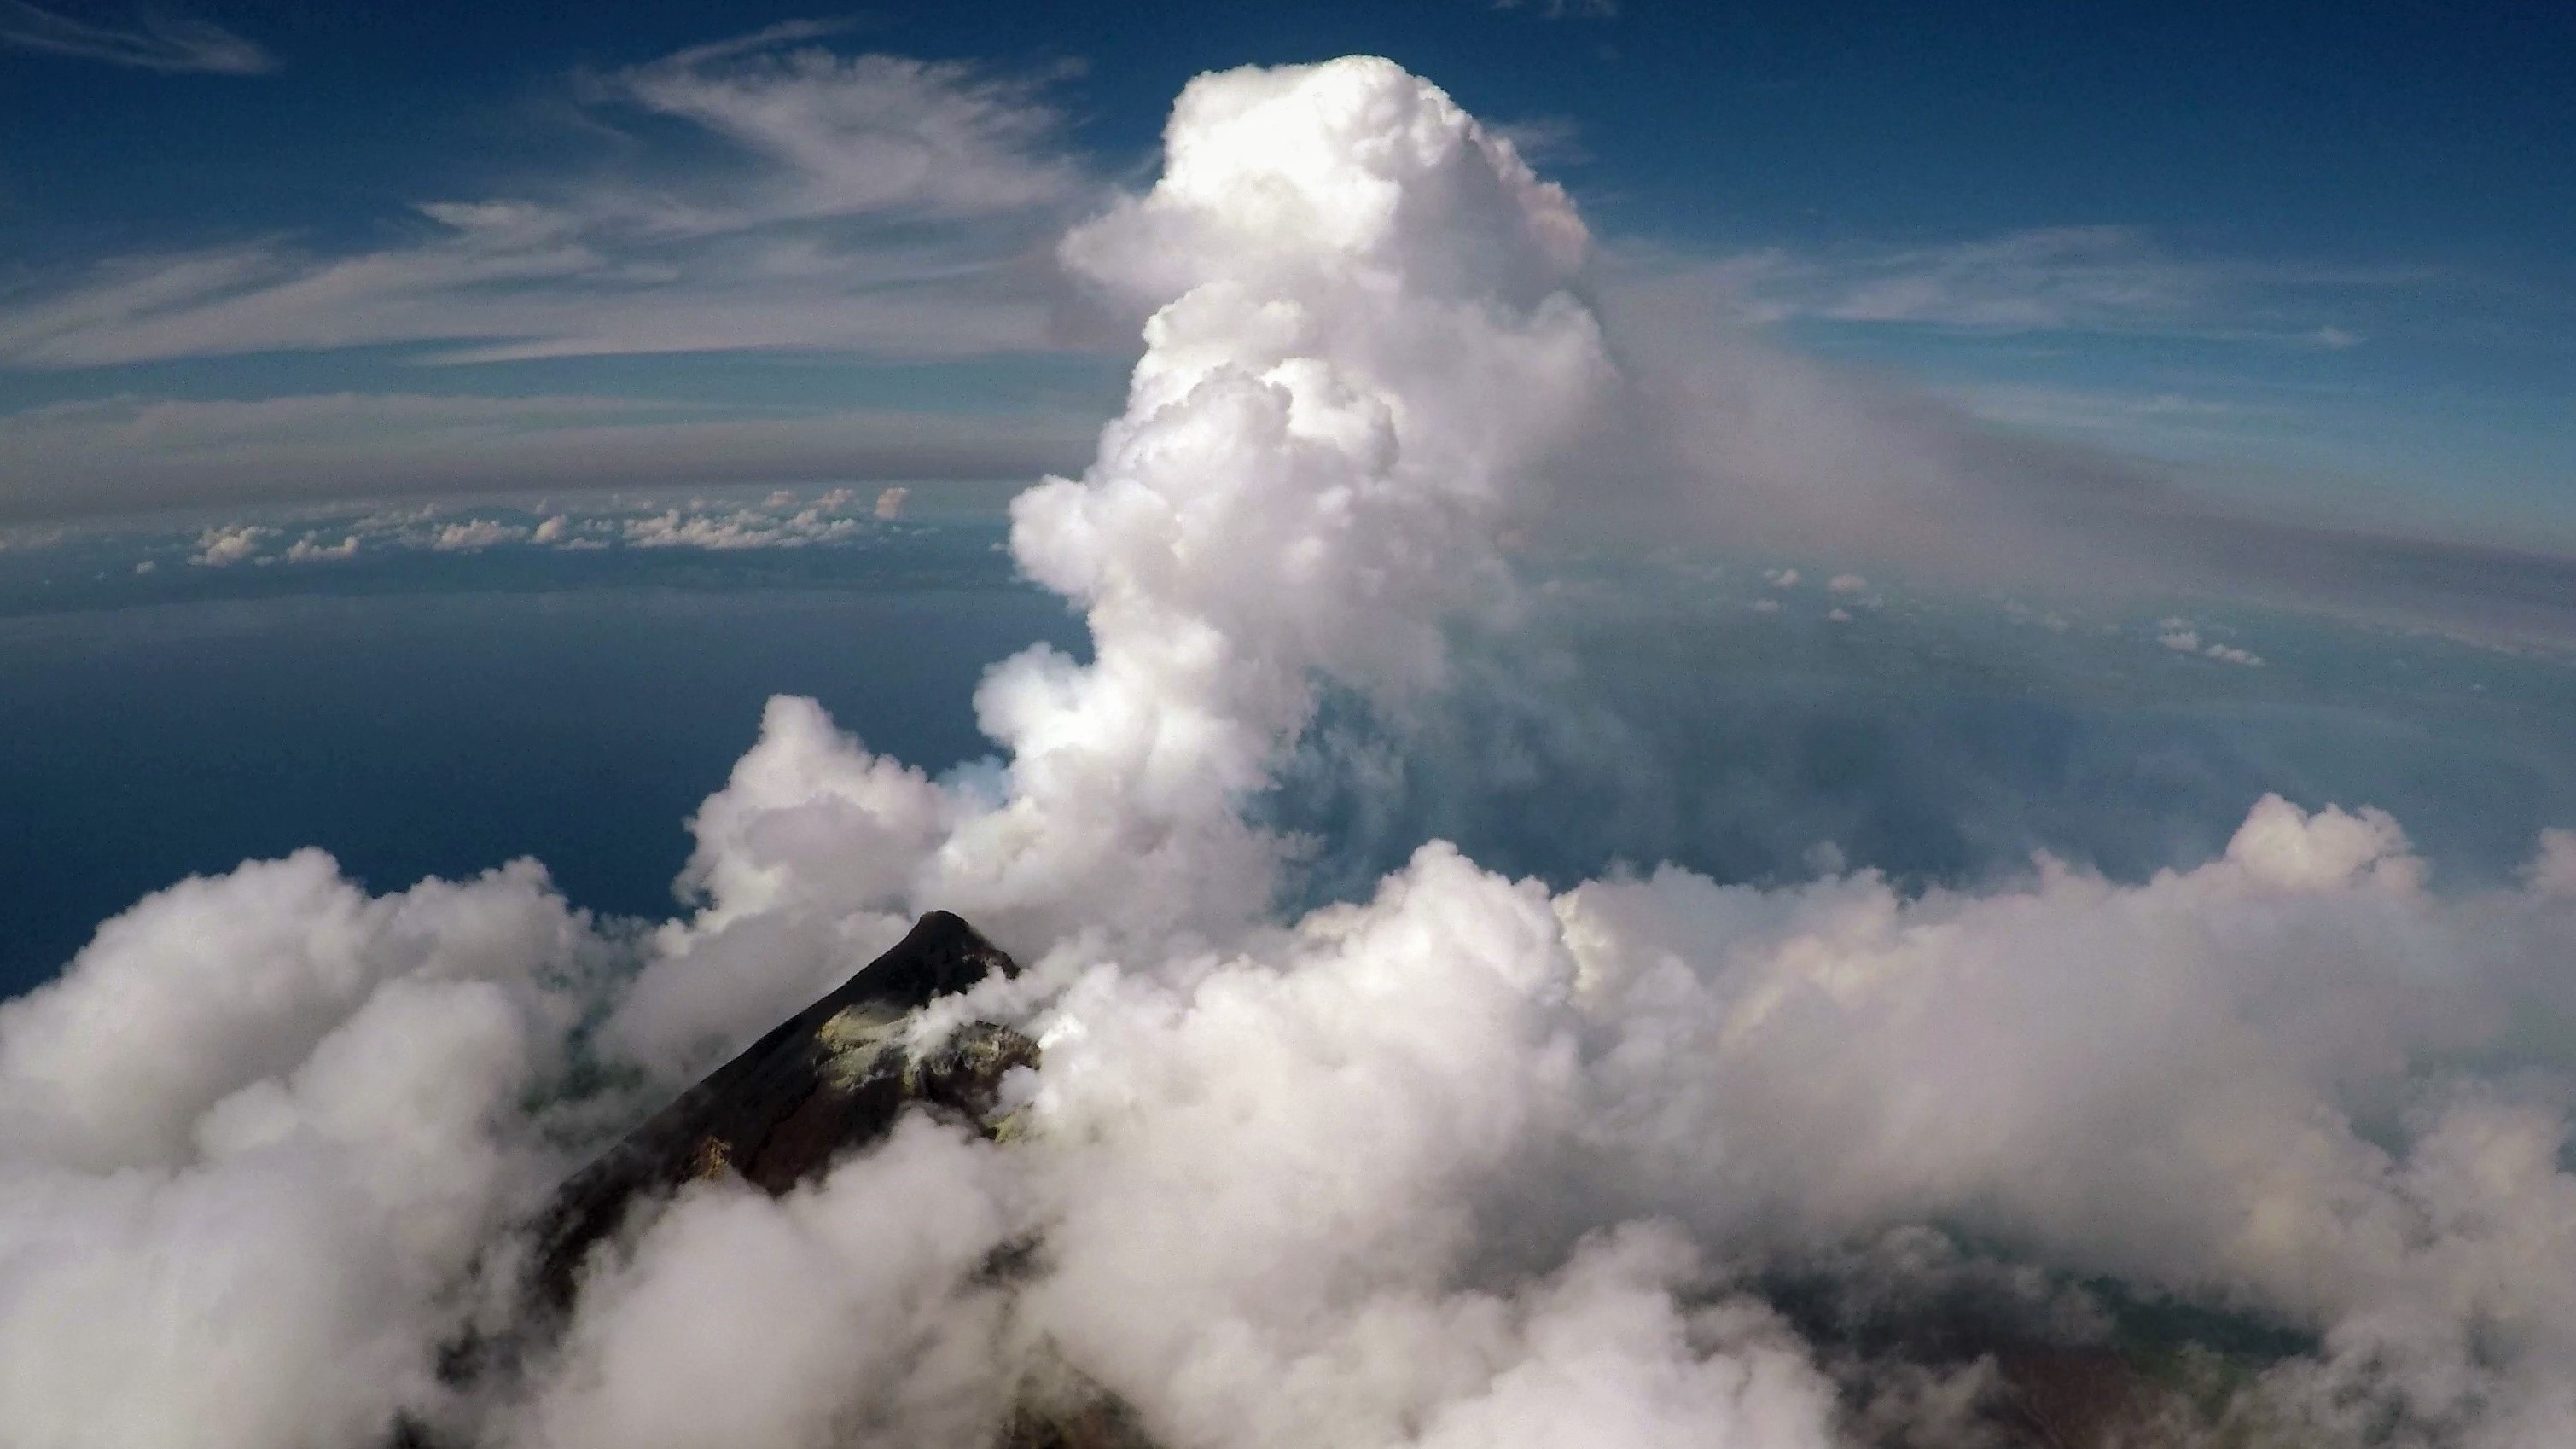 Image taken from a drone looking down on the Manam volcanic plume; image credit Emma Liu, UCL.